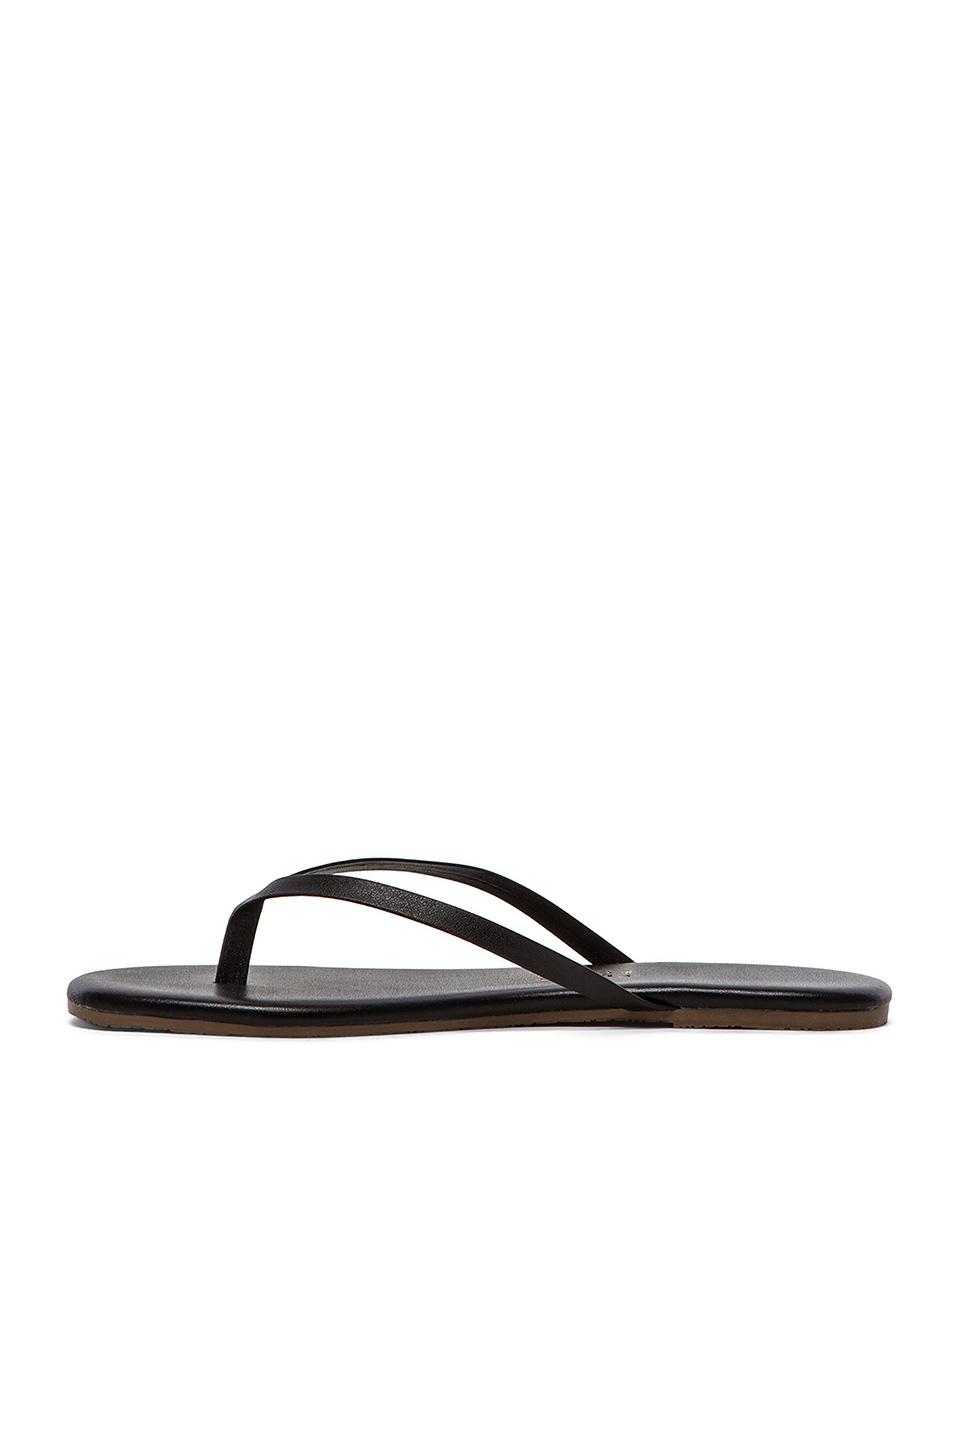 TKEES Leather Liners Flip Flop in Black - Lyst